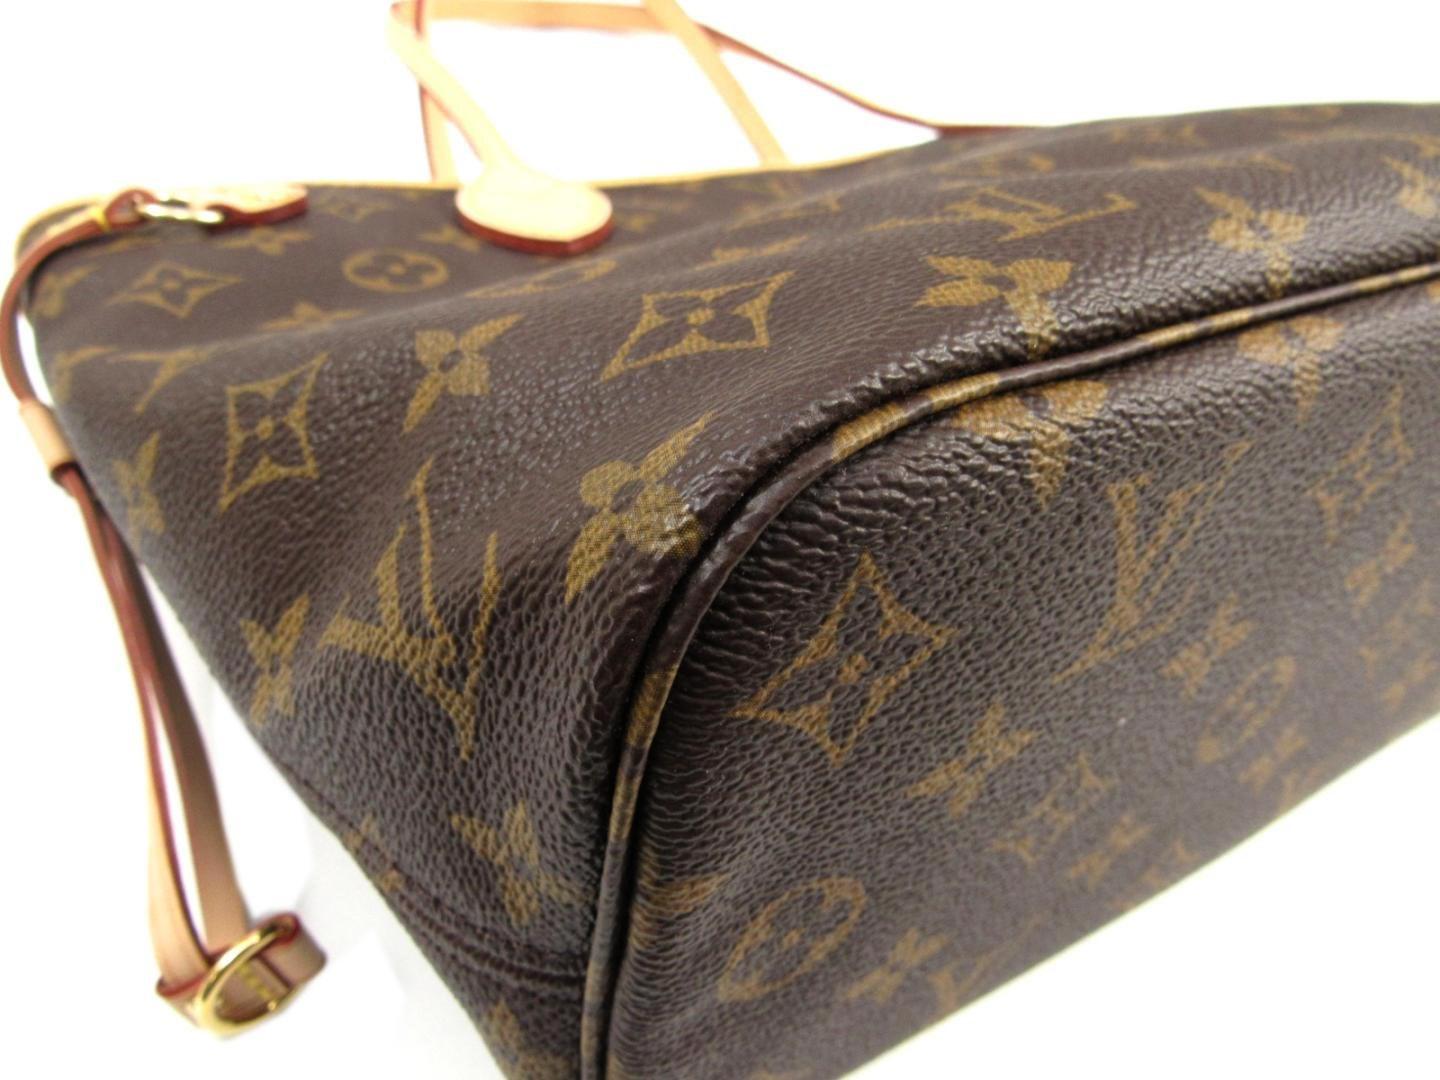 Louis Vuitton Neverfull Pm Shoulder Tote Bag Monogram Canvas M41245 in Brown - Lyst